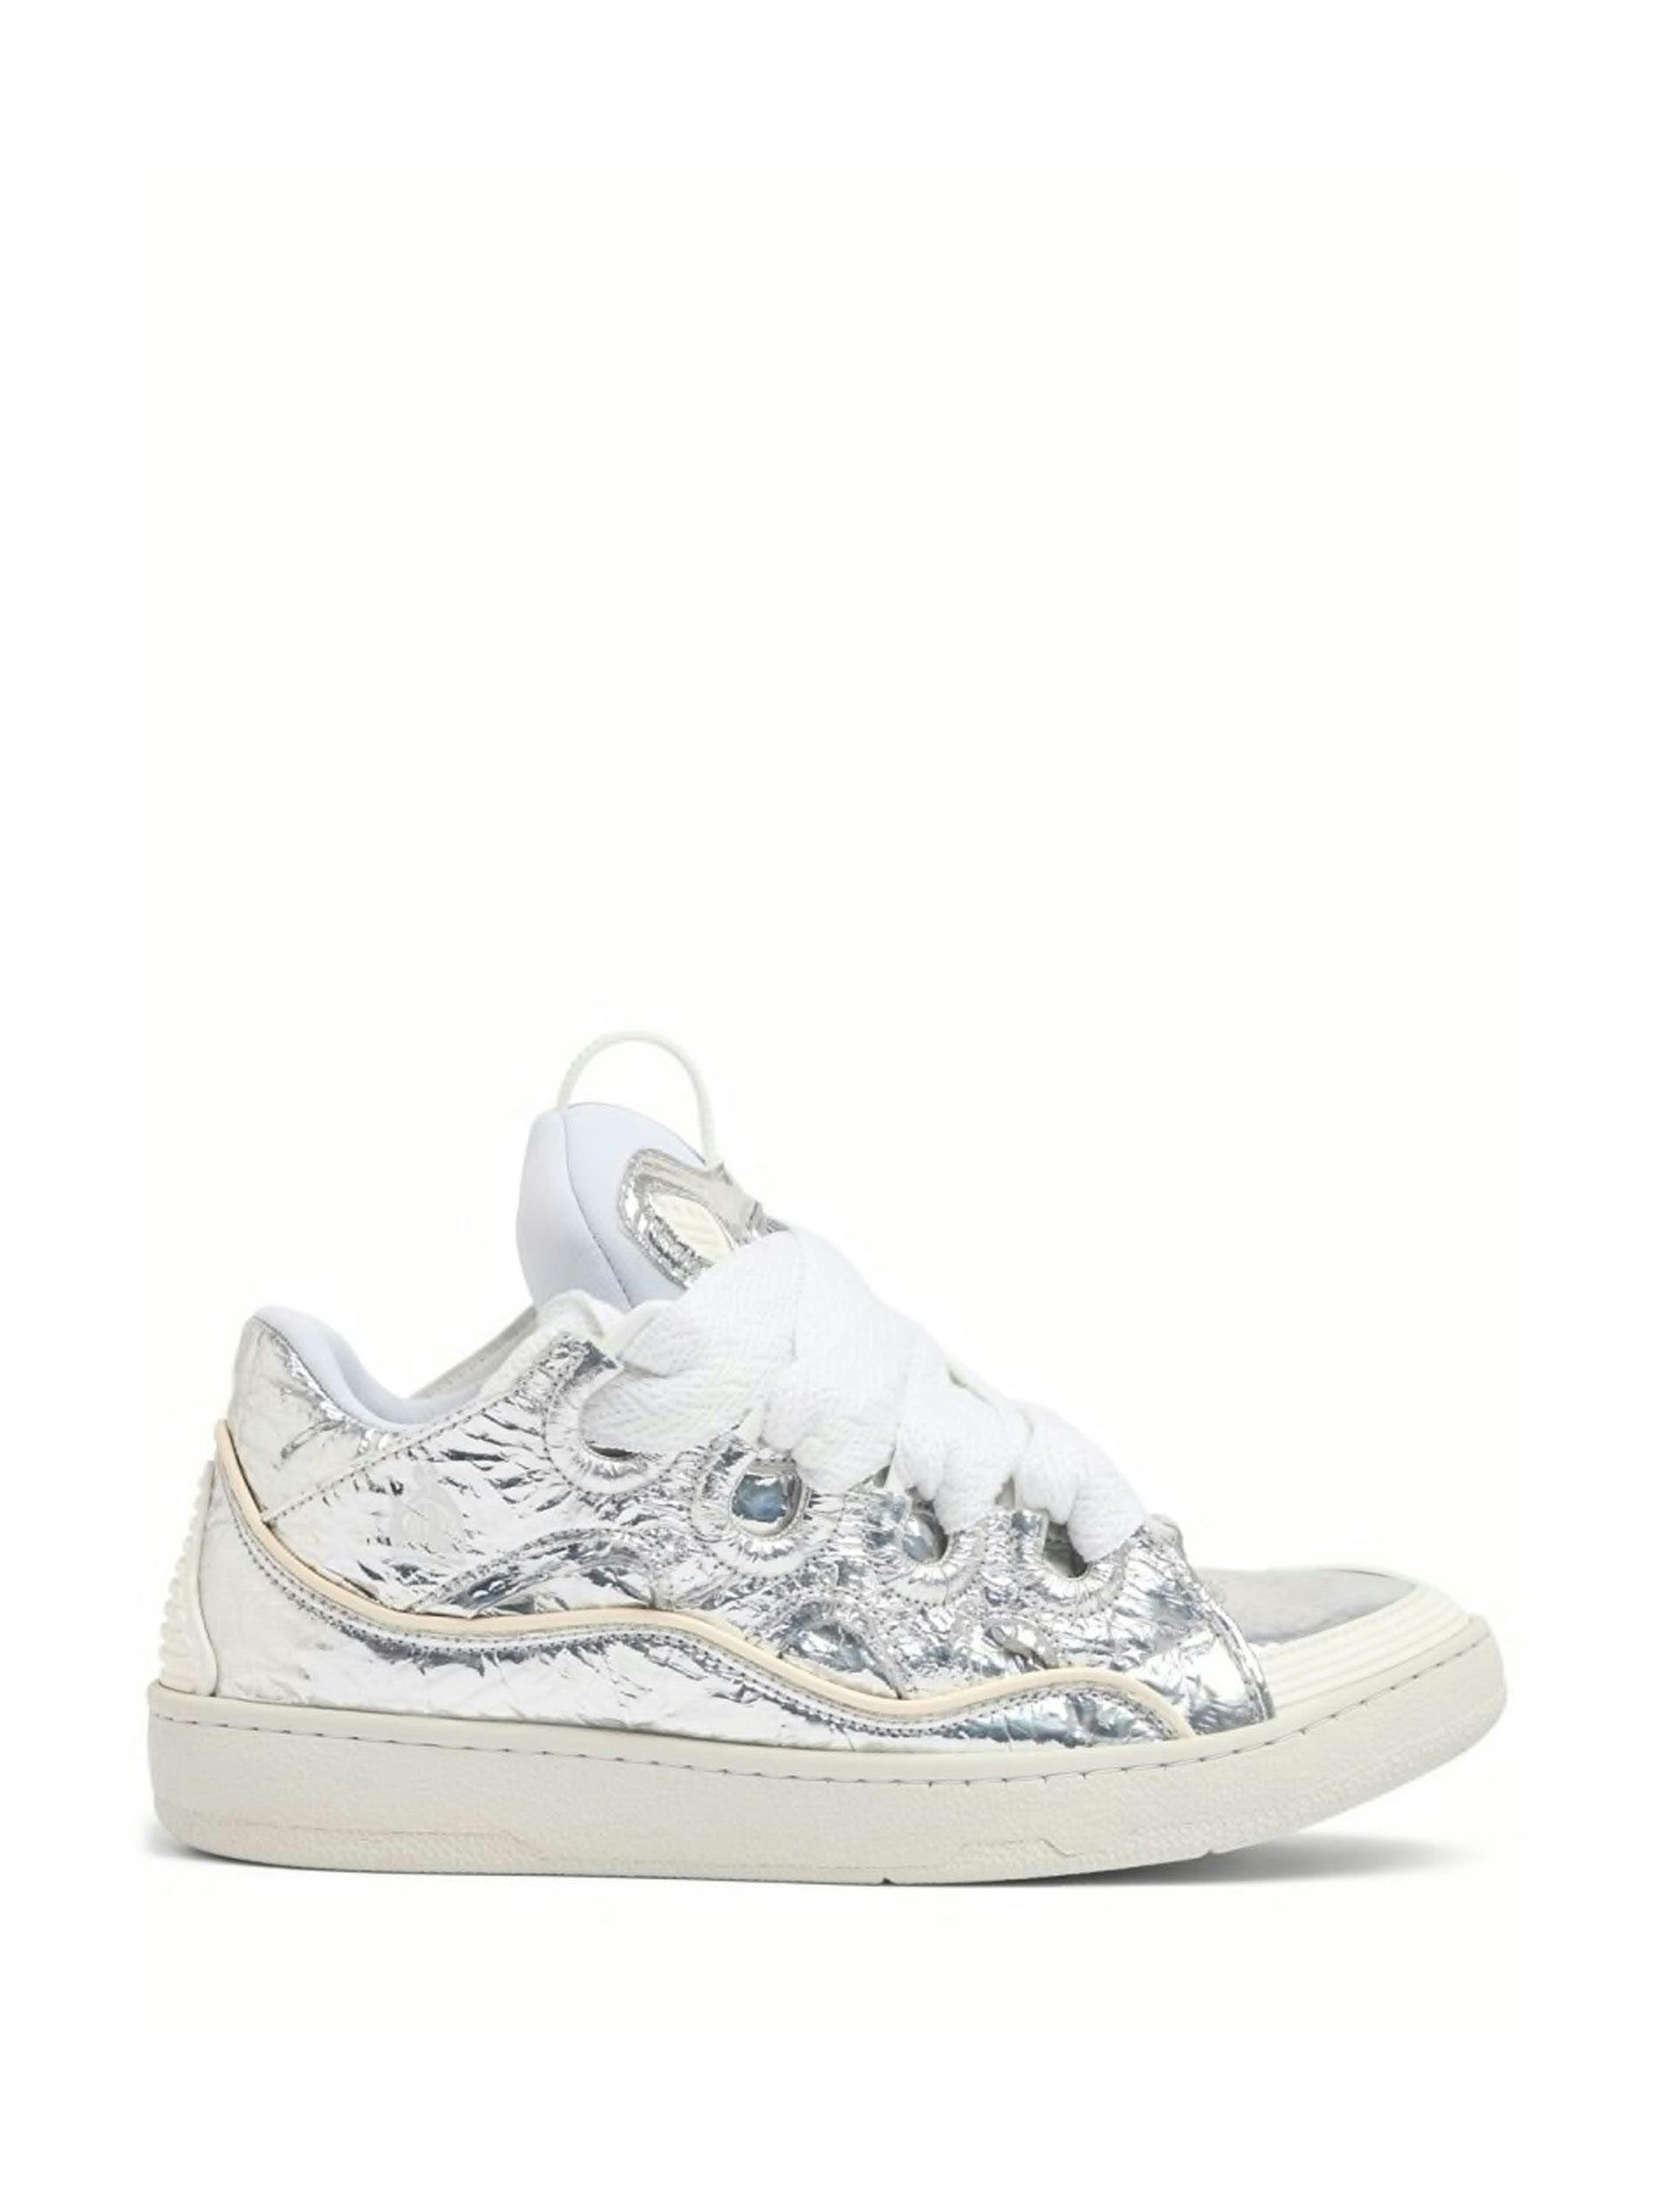 Curb metallic leather and mesh sneakers